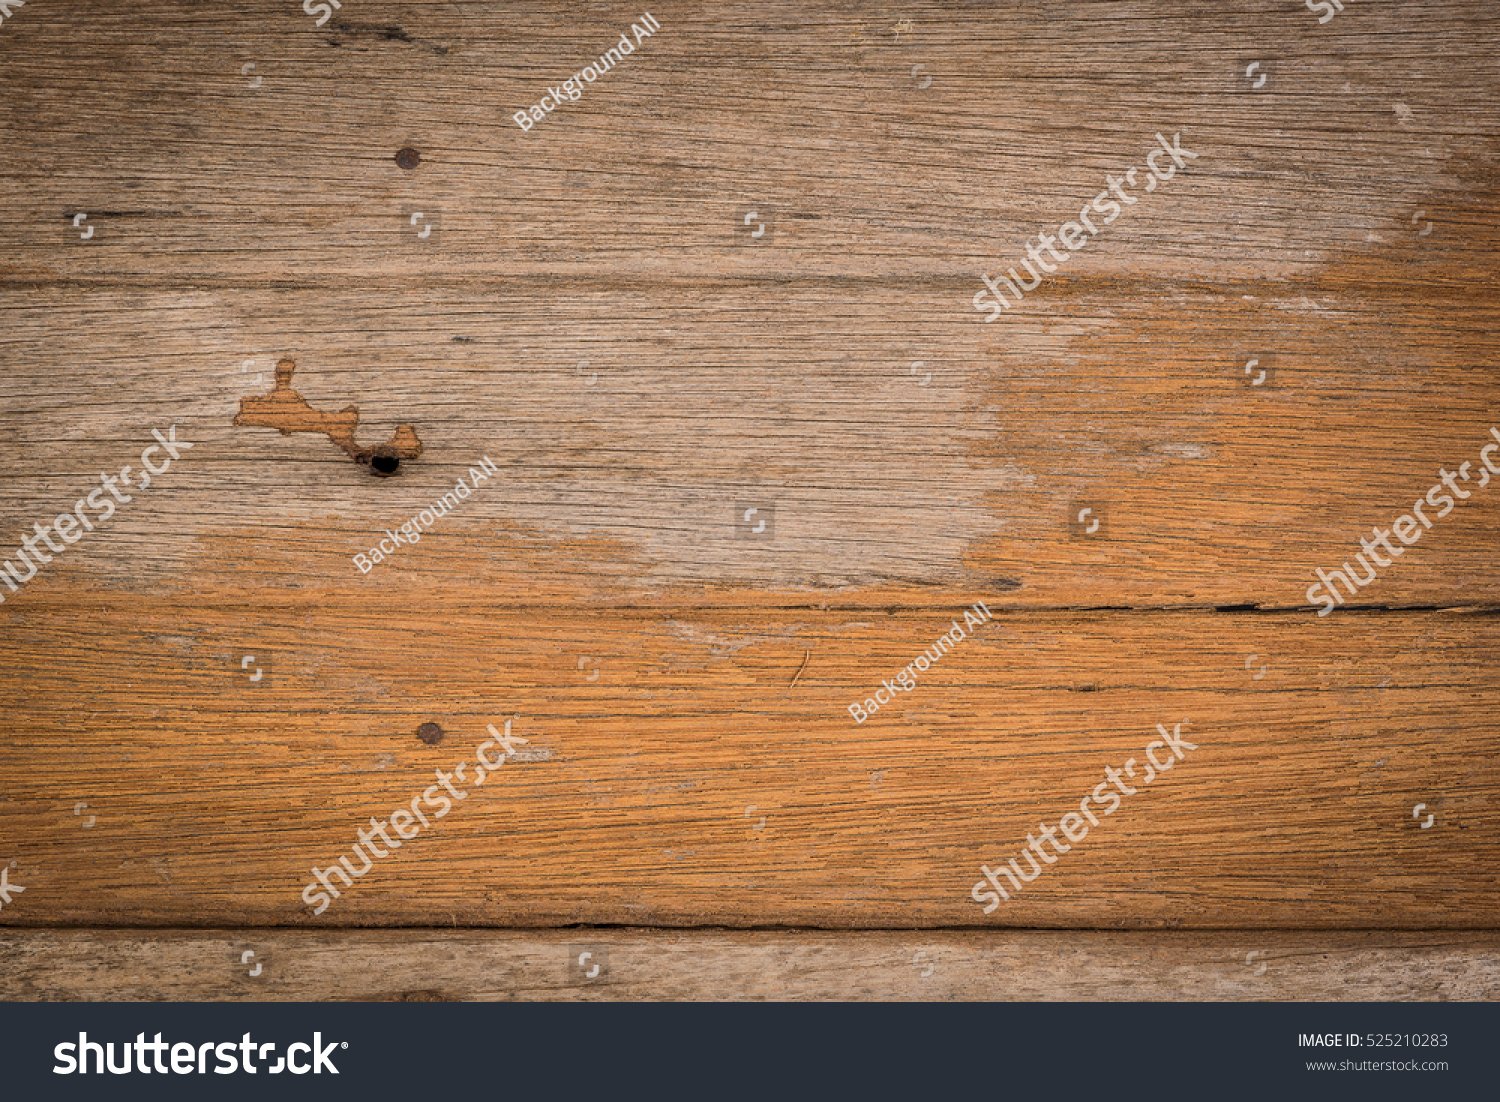 close-up view of old wood background #525210283